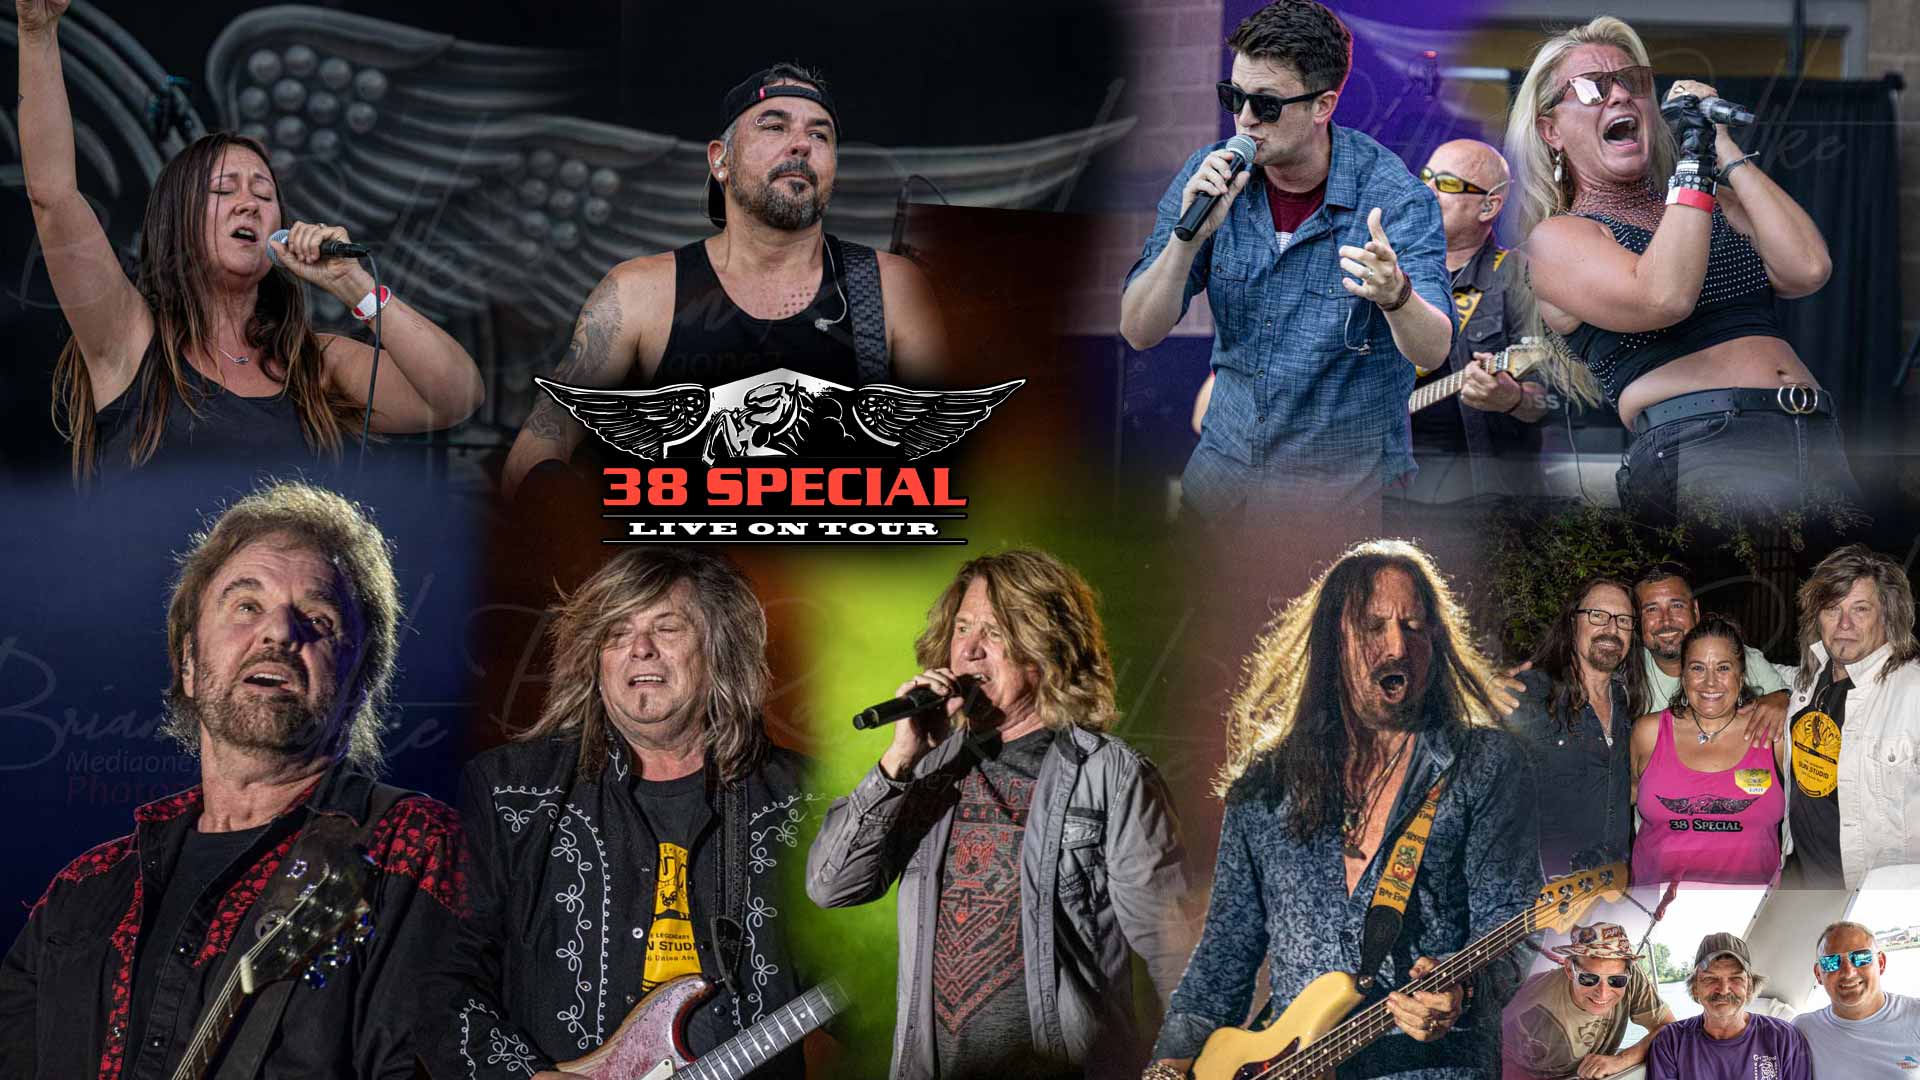 38 Special, Mount Olive and Bound for Branson Bands at Waterfest Oshkosh